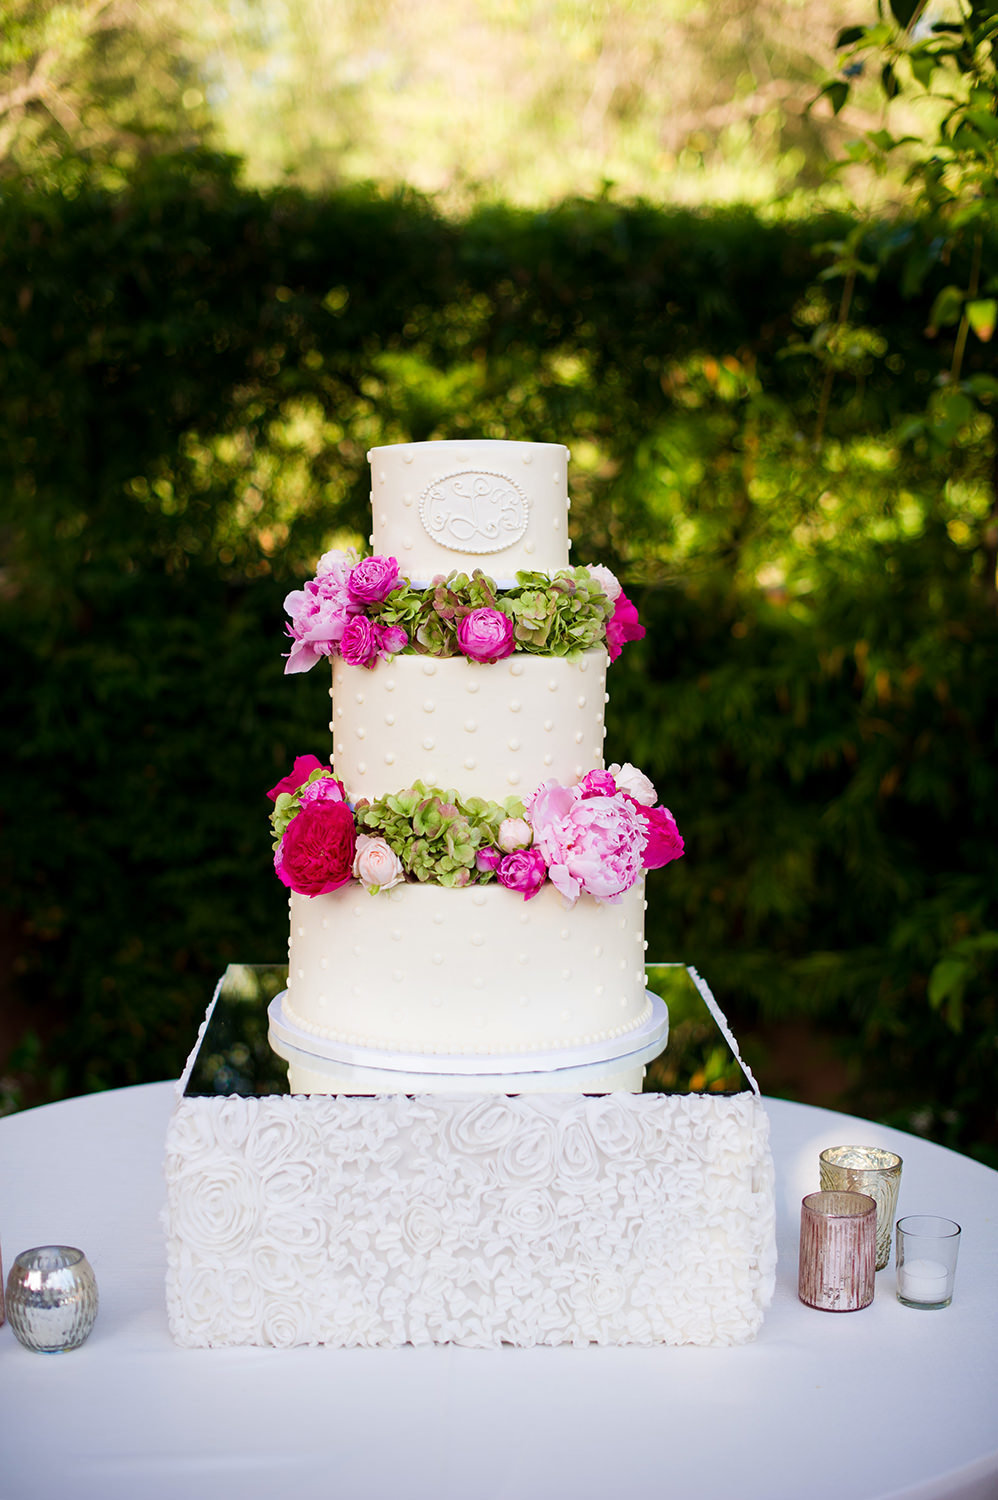 Tiered wedding cake with floral decorations